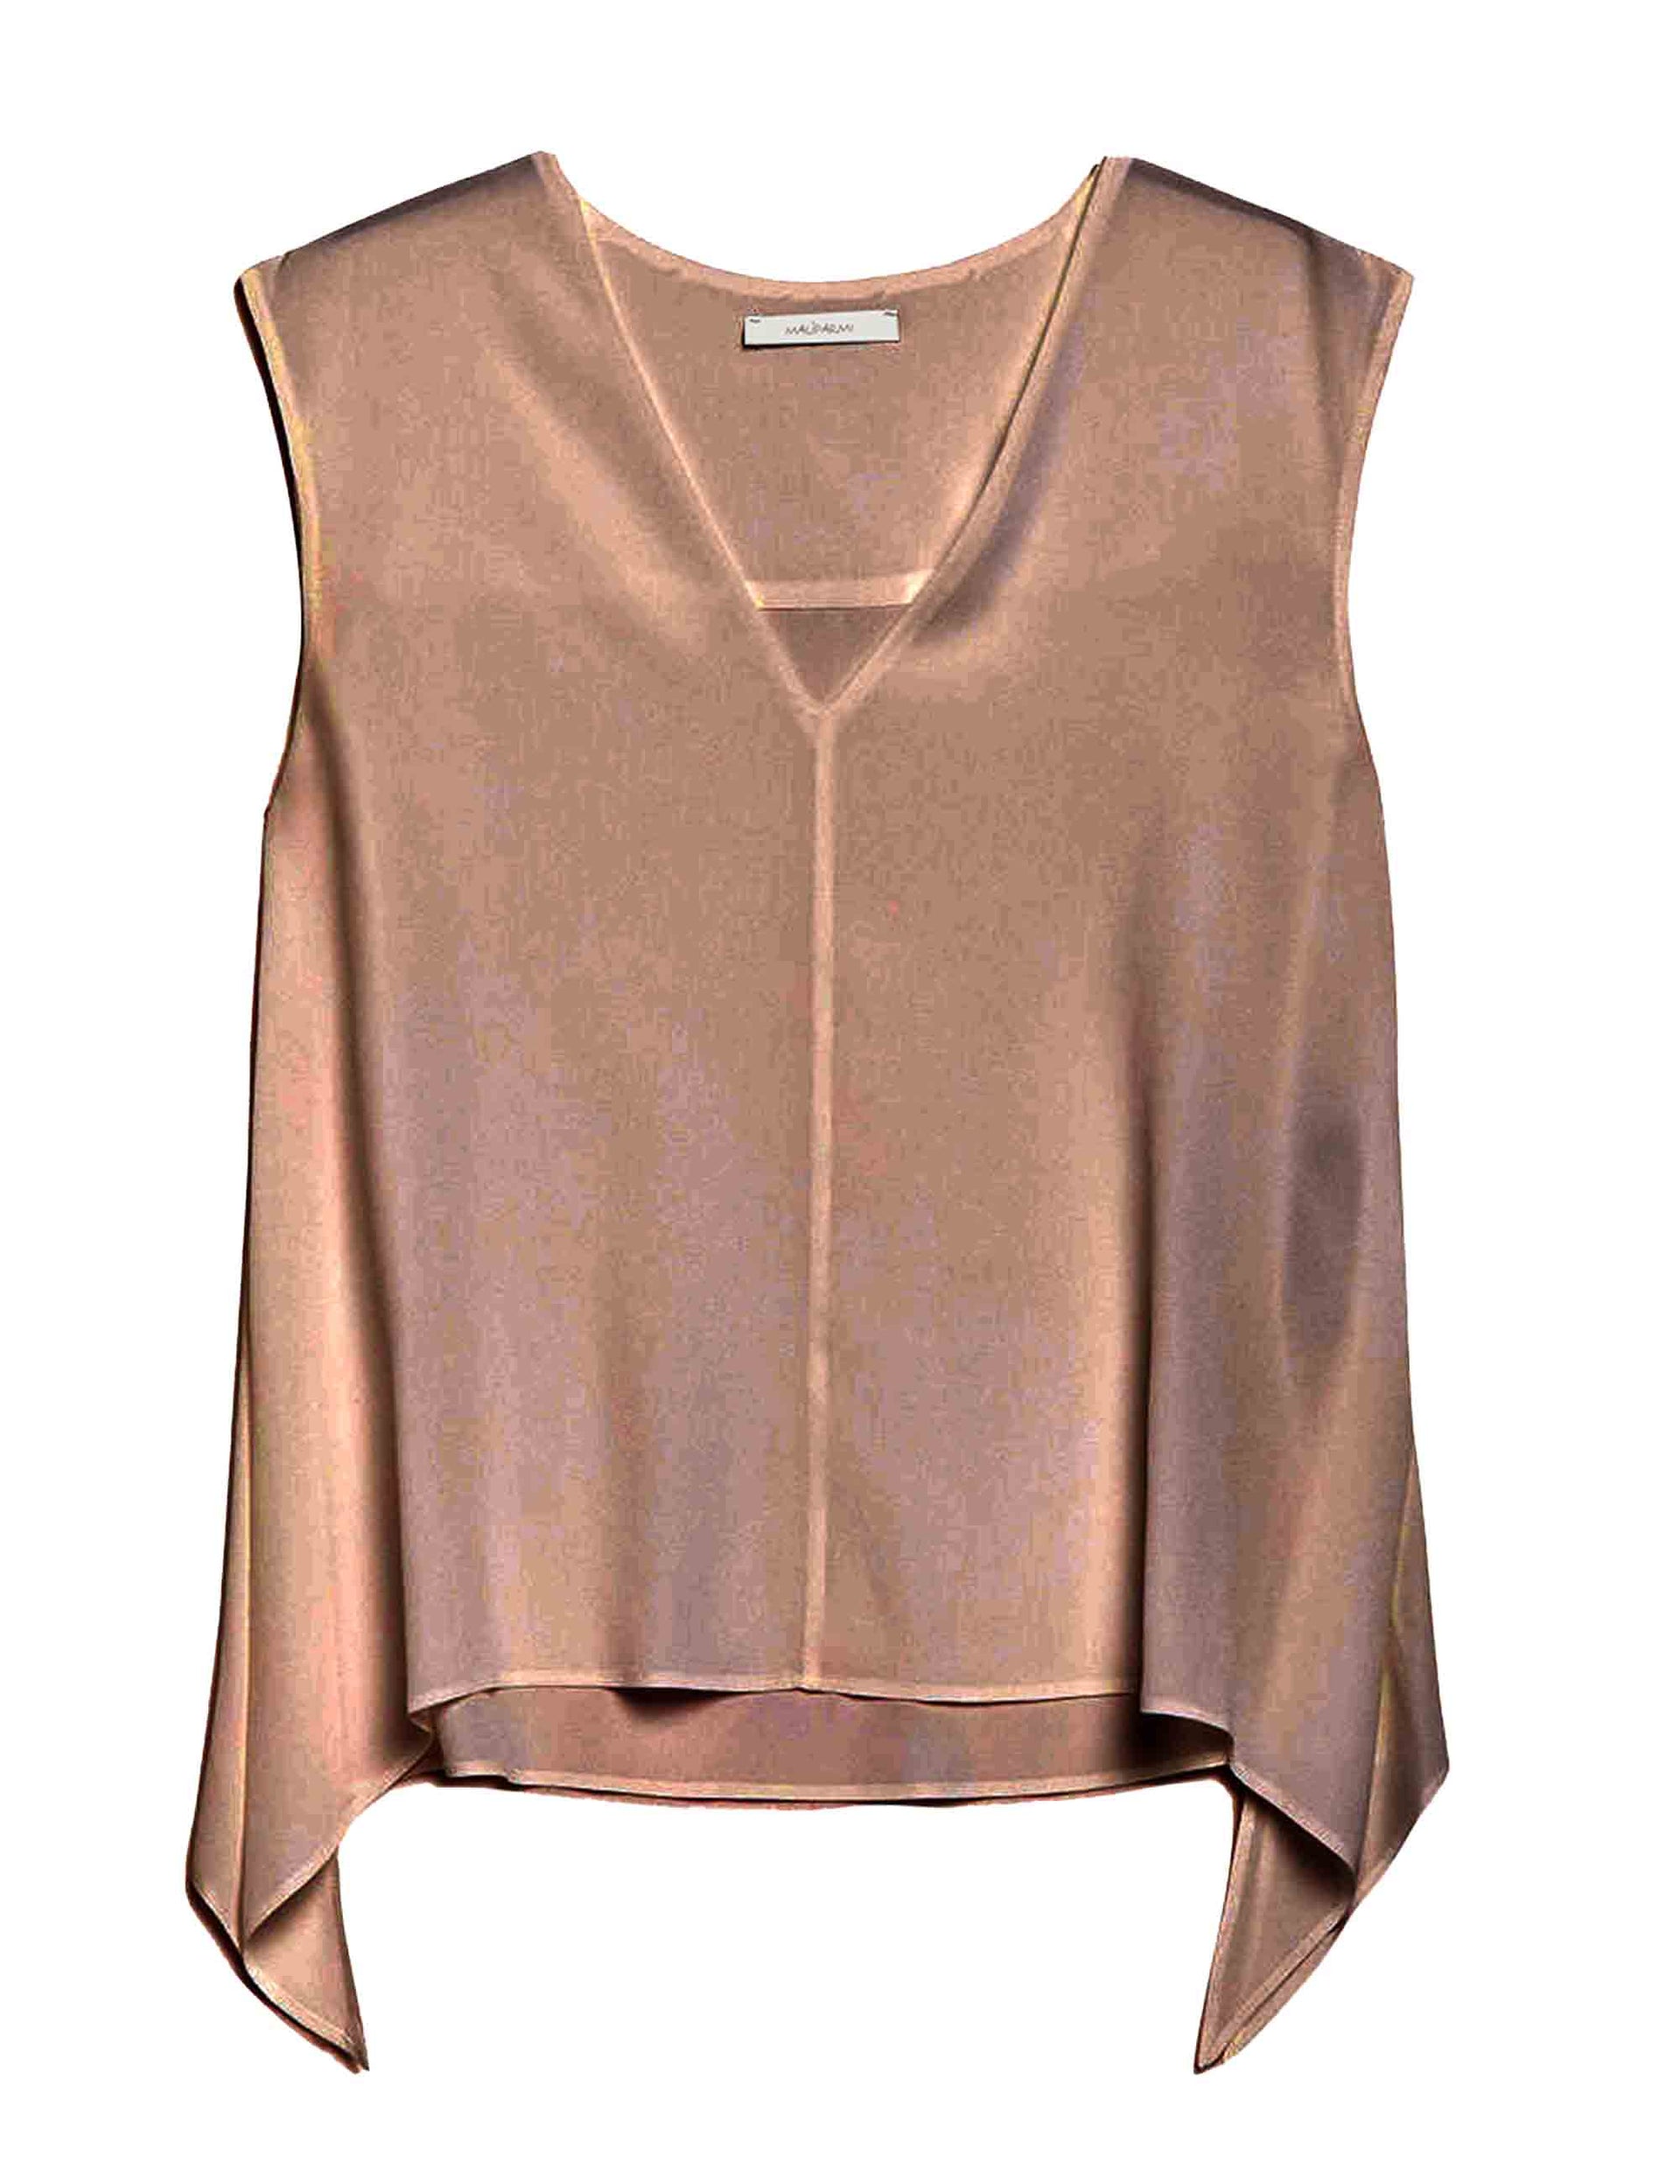 Fluide Crepe women's top in taupe silk